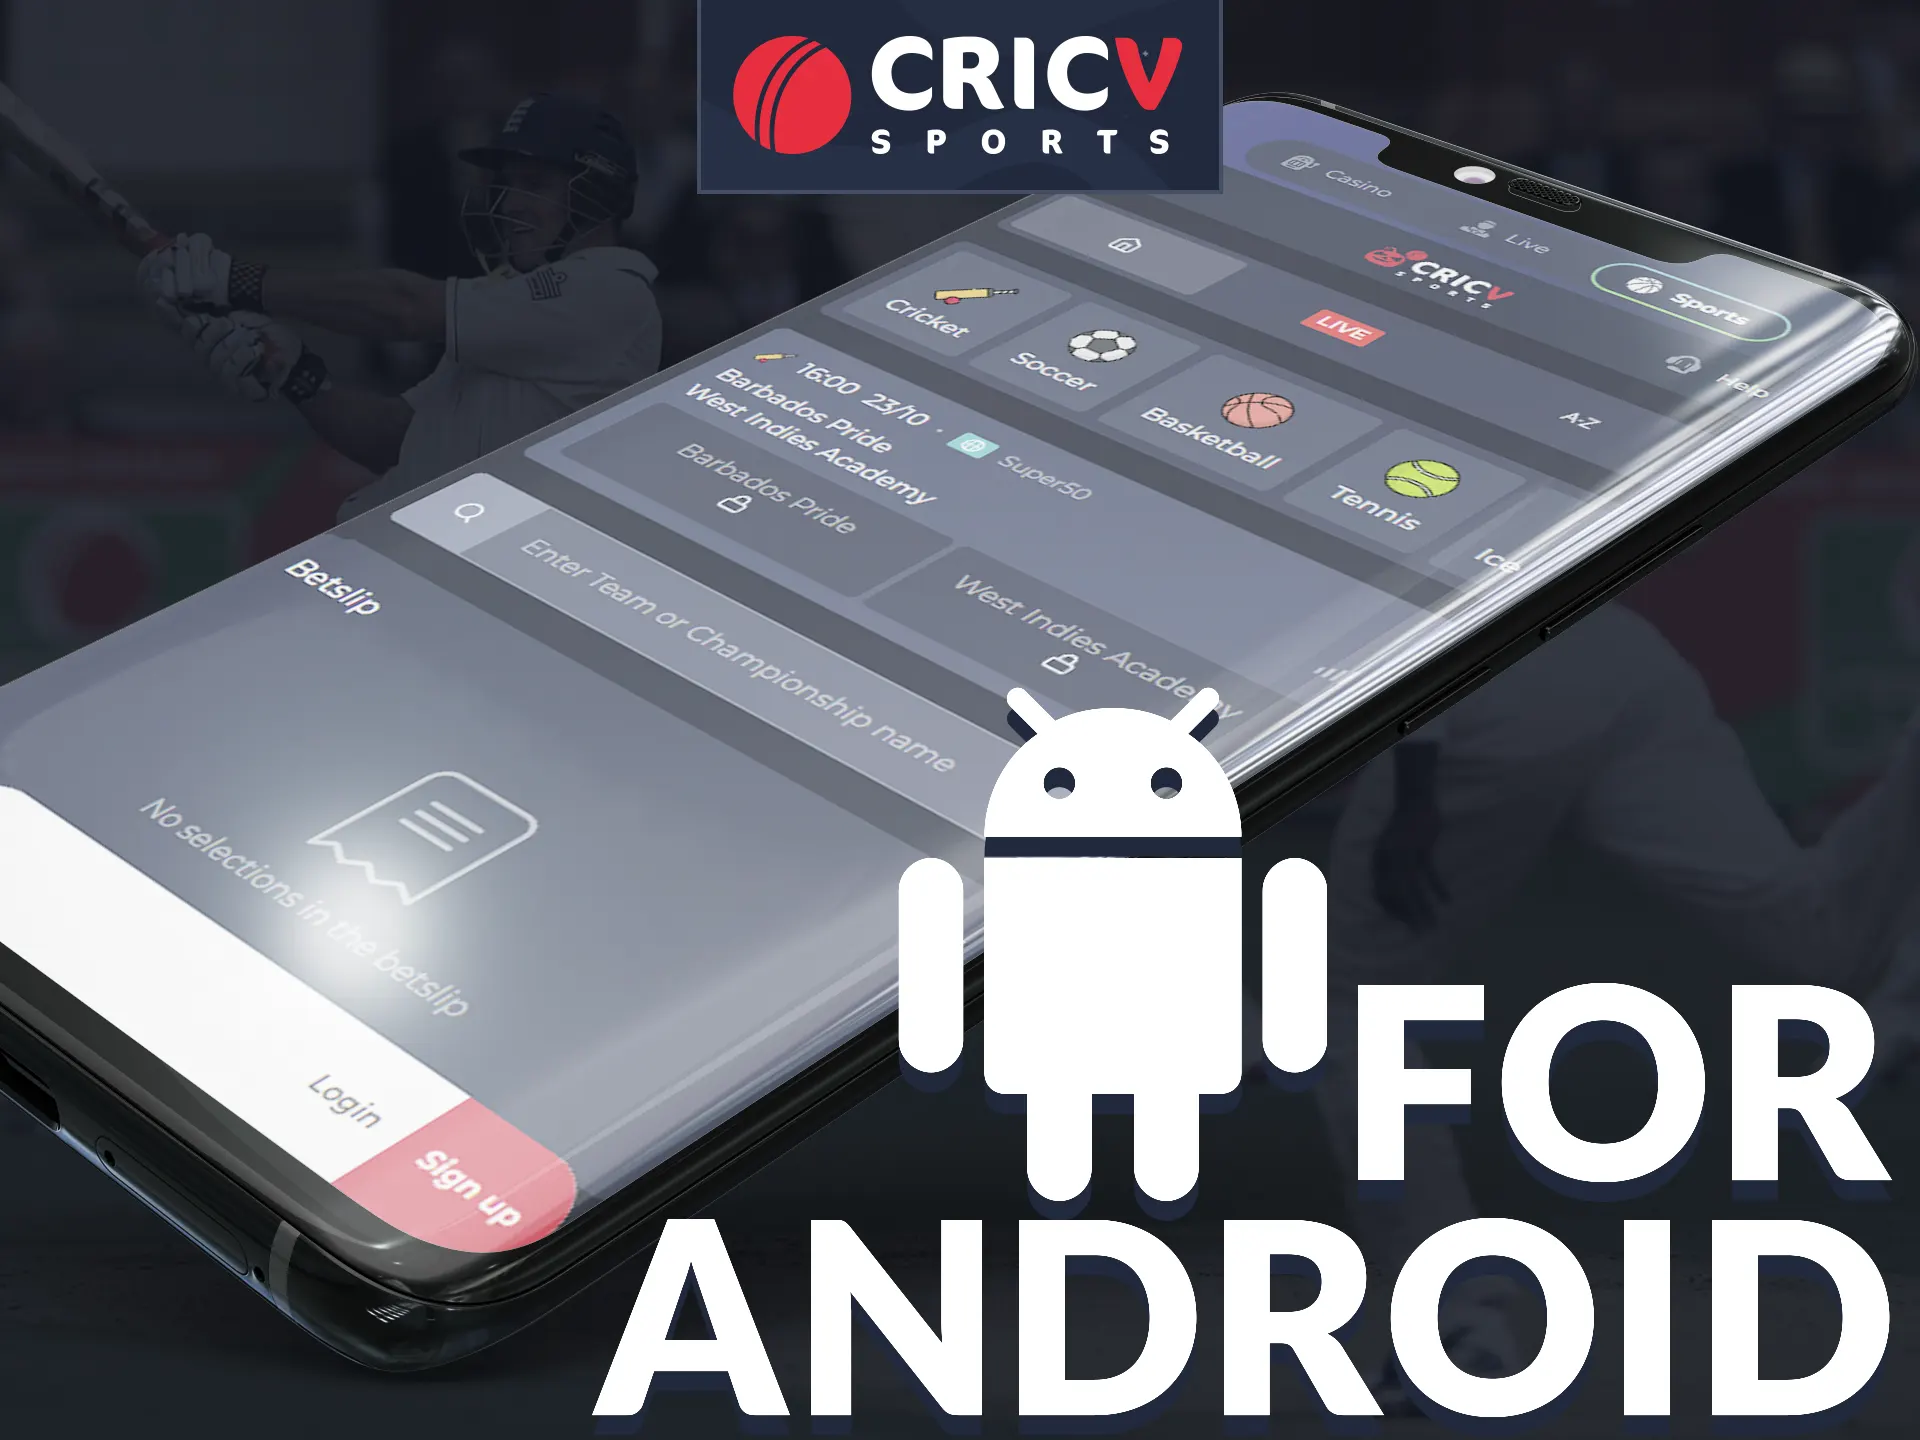 Download the Cricv app to your Android device.